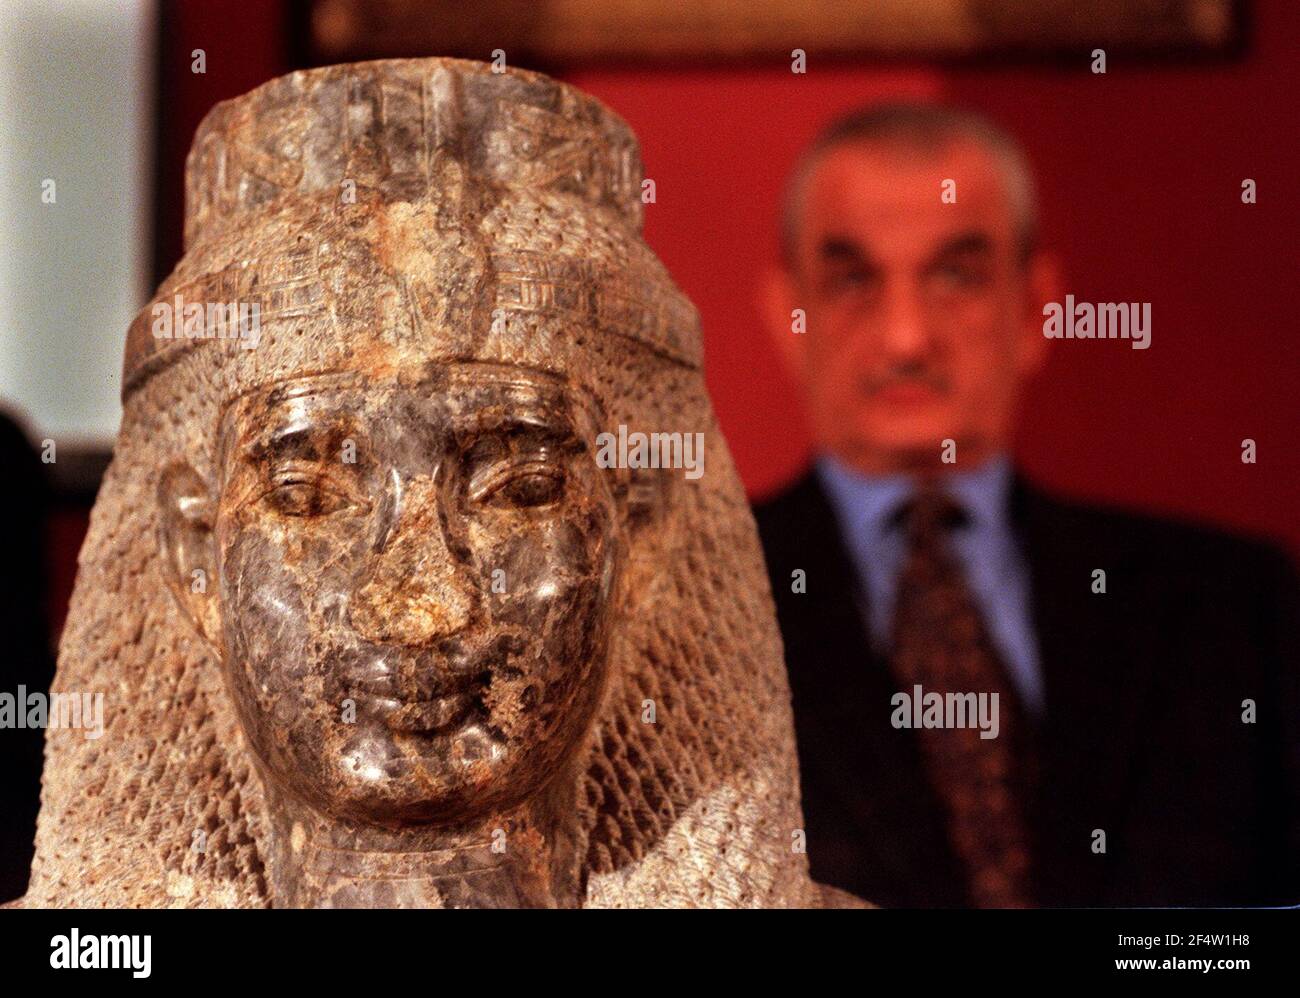 The sculpted head of an Egyptian queen January 2000(thought to be Nefertari) - the so-called Head of Meryet, which was smuggled out of Egypt in the early 1990's, was today returned to the Egyptian government by handing it over to the Egyptian ambassador Mr Adel El-Gazzar, by Dr Robert Anderson, the director of the British Museum.  The picture shows Mr El-Gazzar, with the head at the British Museum. Stock Photo